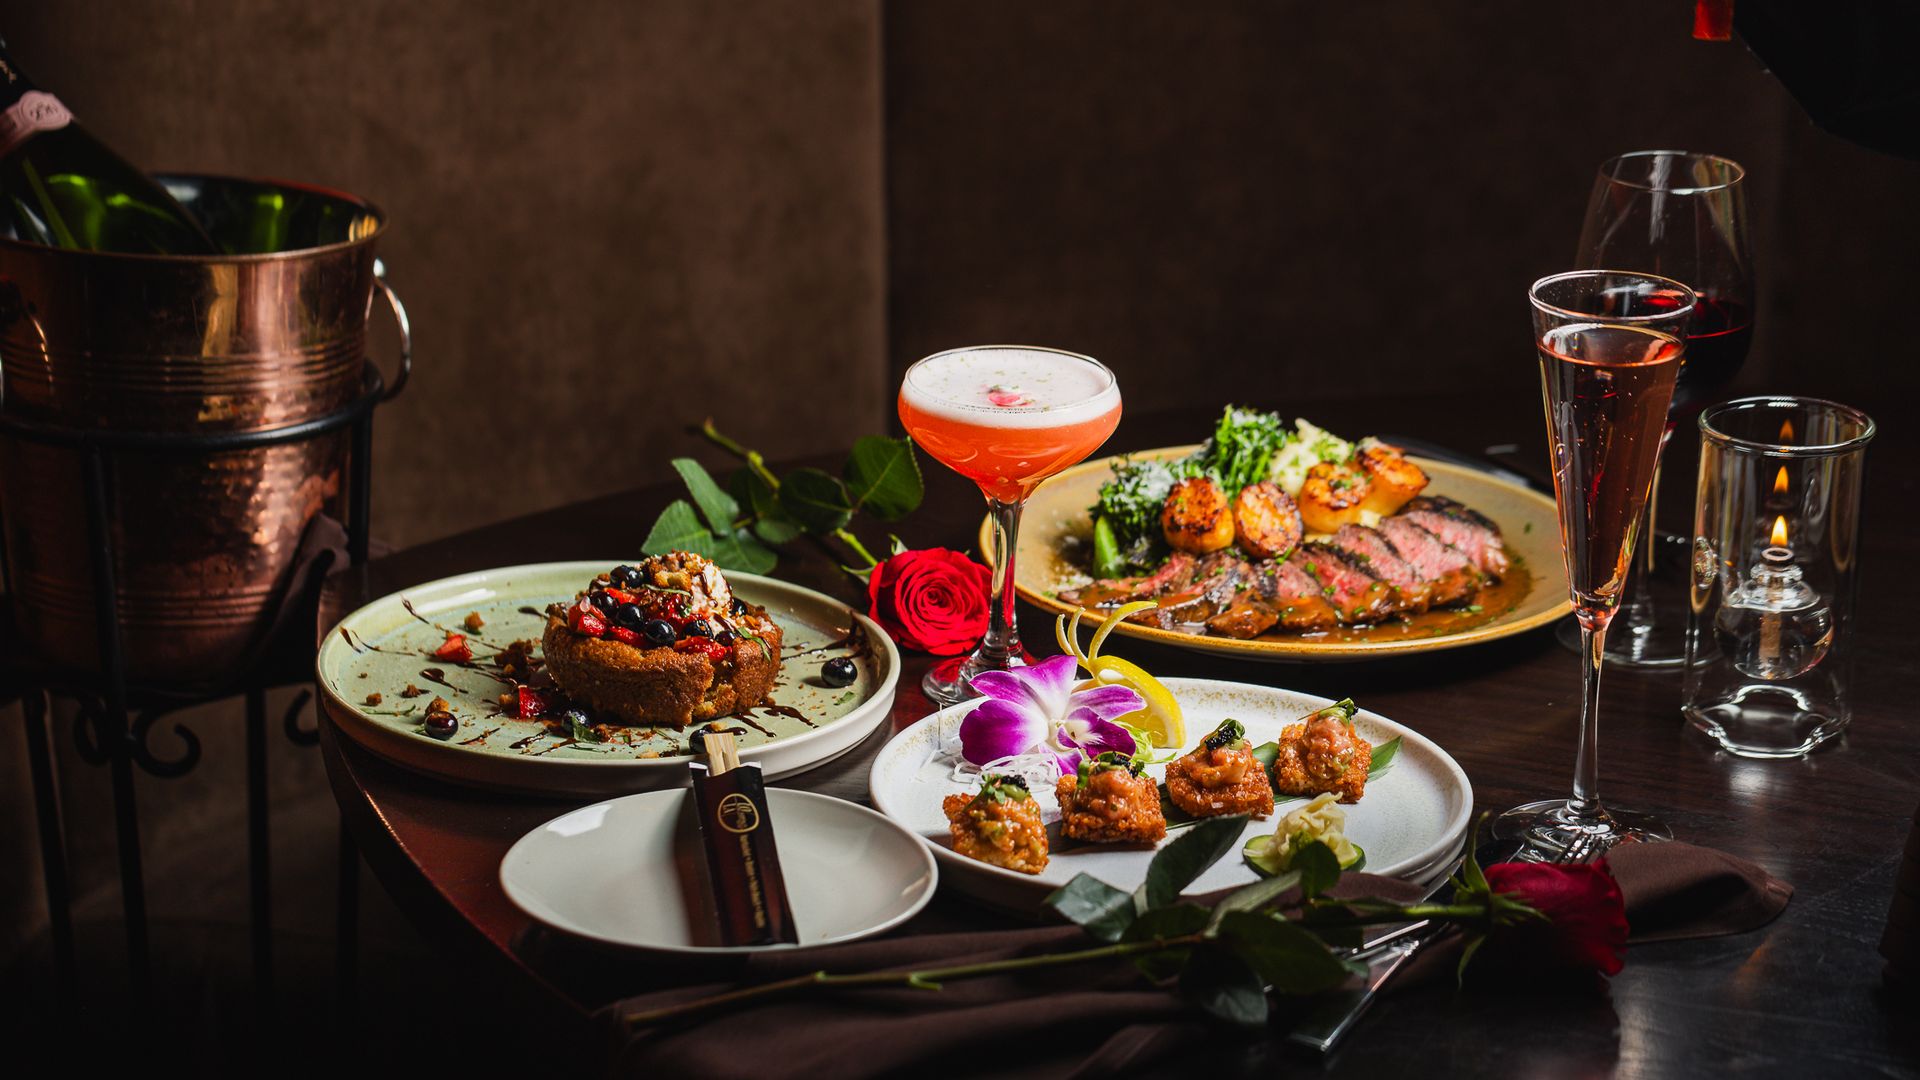 A small table showing LoLa 42's Valentine's Day menu, which includes toro crispy rice, grilled NY strip and seared scallop, a banana butter cake and a tequila cocktail called the "heartburn."